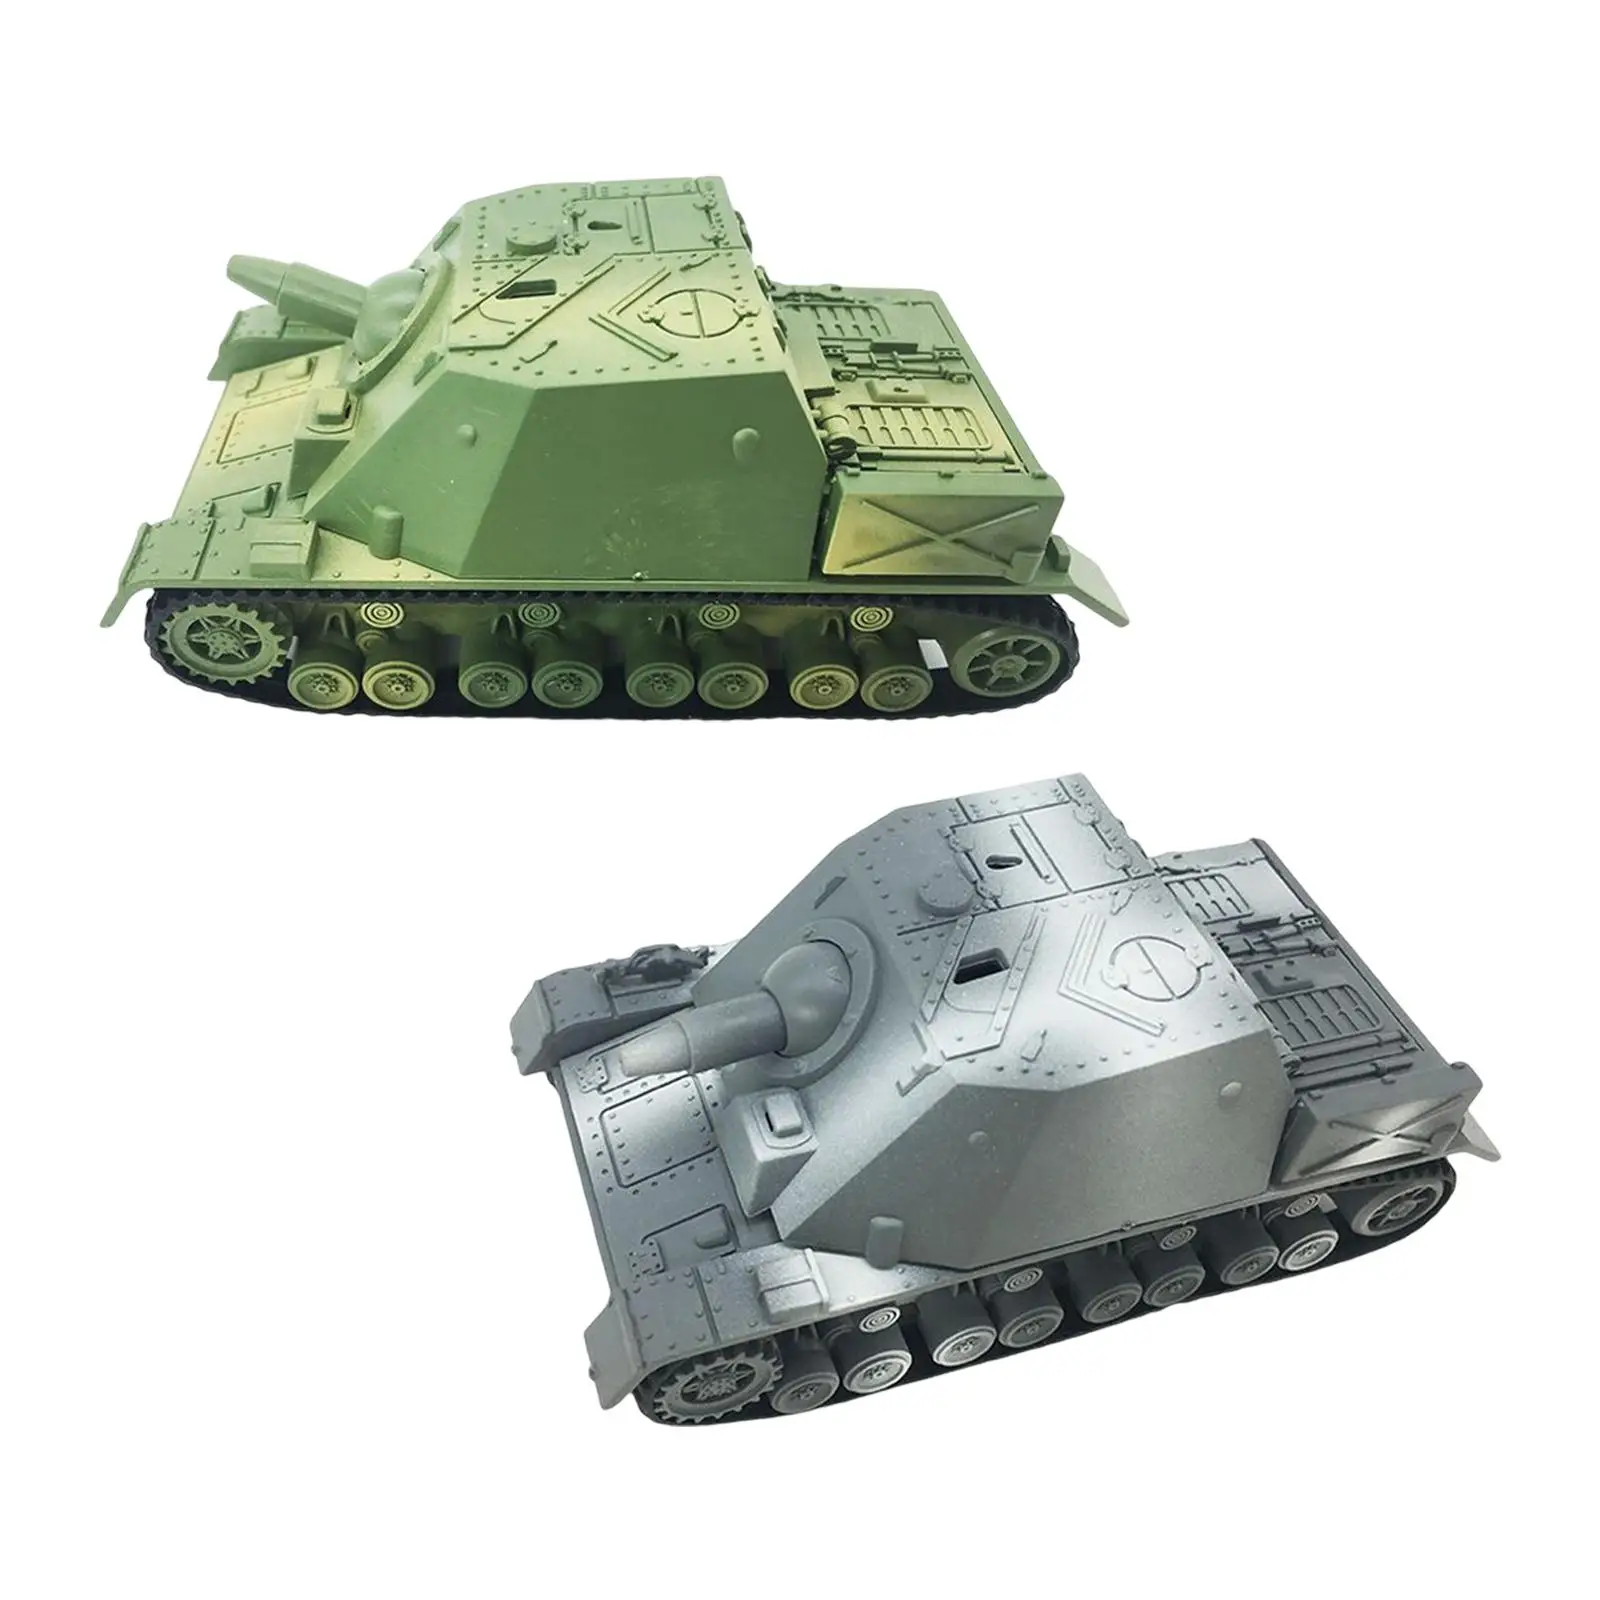 1/72 4D Assemble Tank Collectible Gifts Armored Vehicle Micro Landscape Educational Toy Hand Painted Version Tank Model for Boys